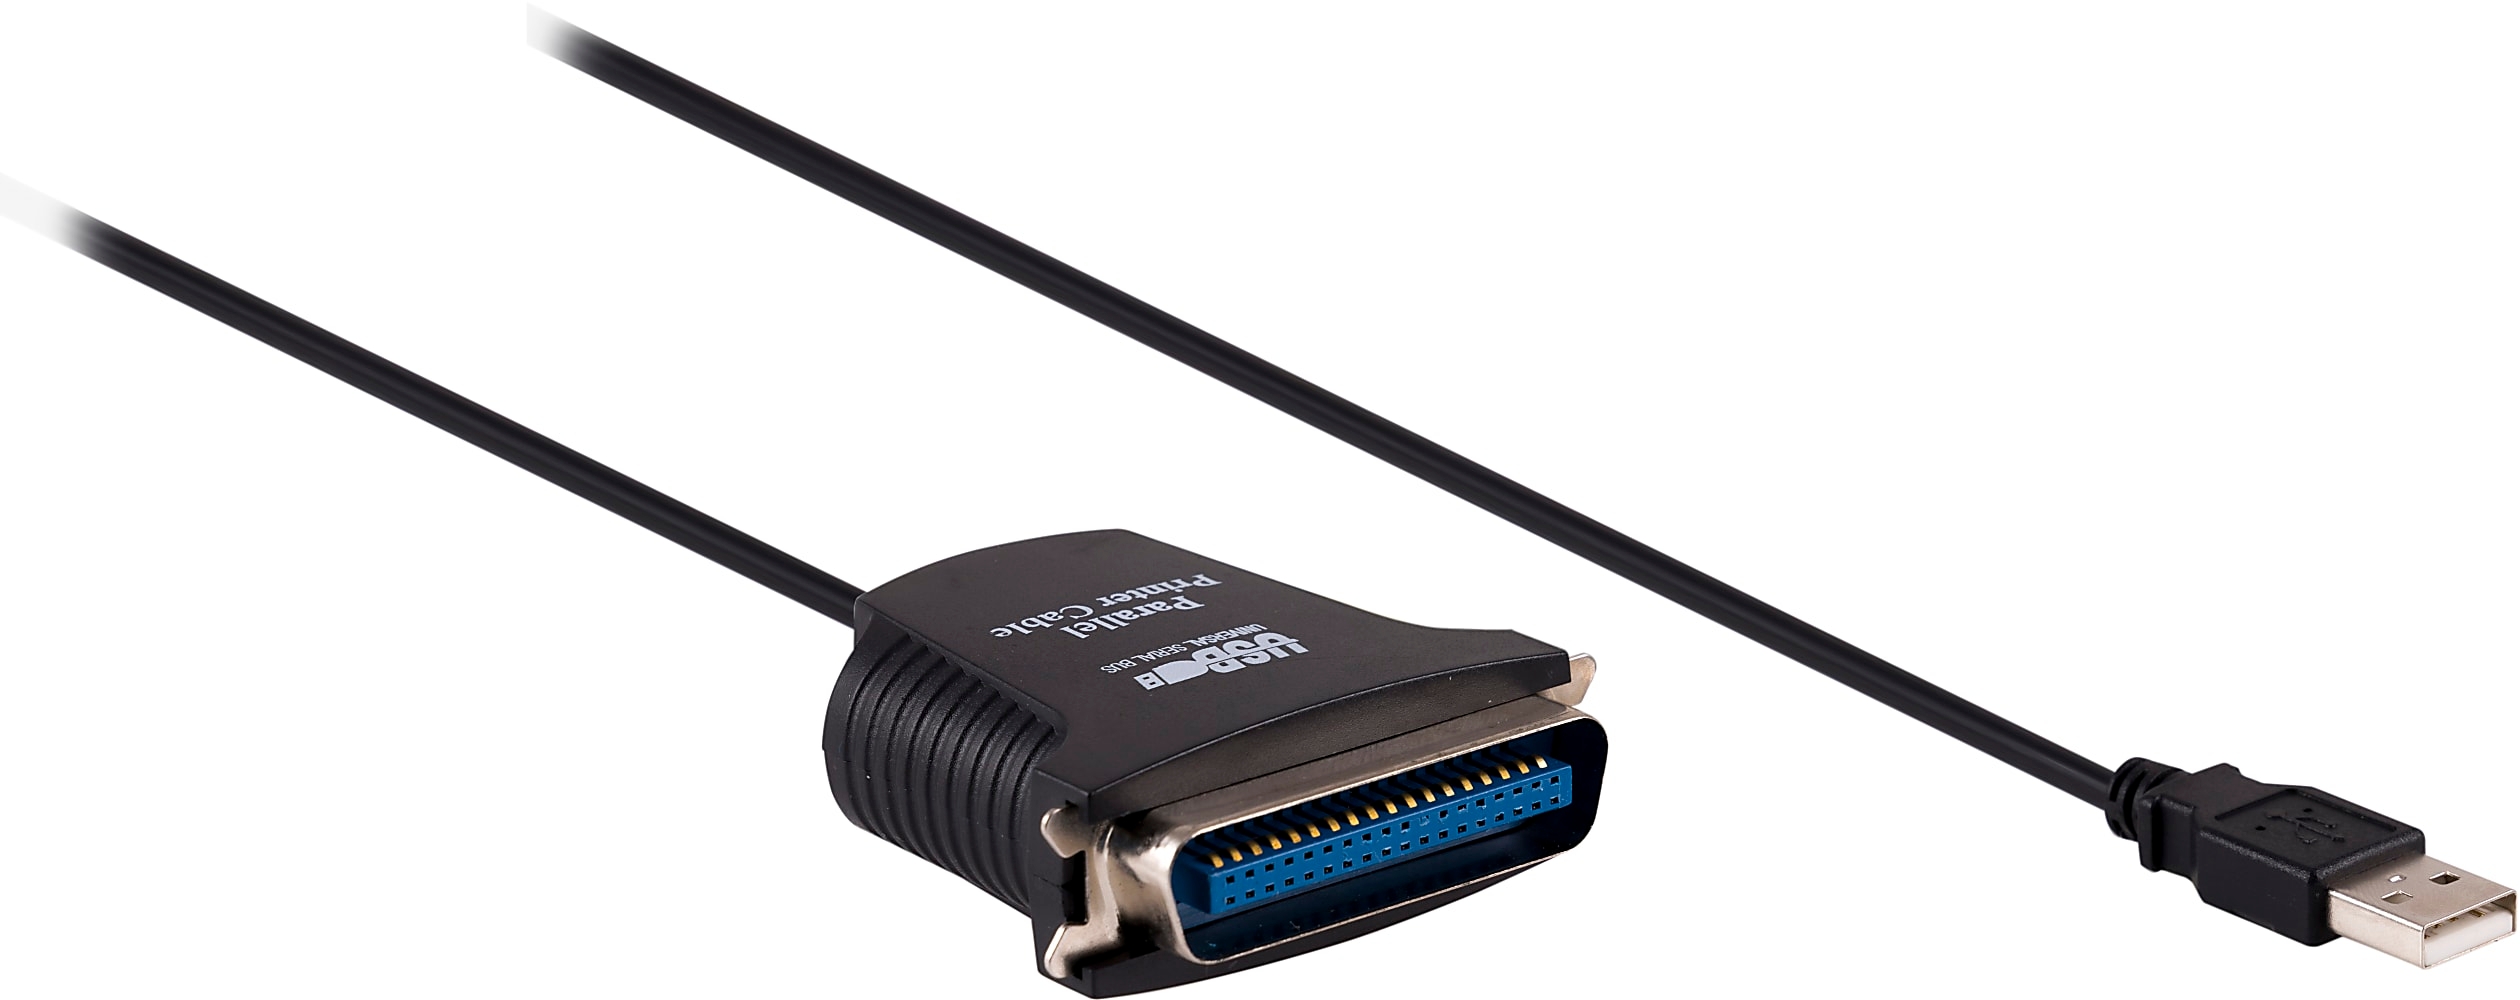 Ativa USB 3.0 To Network Adapter 27563 - Office Depot